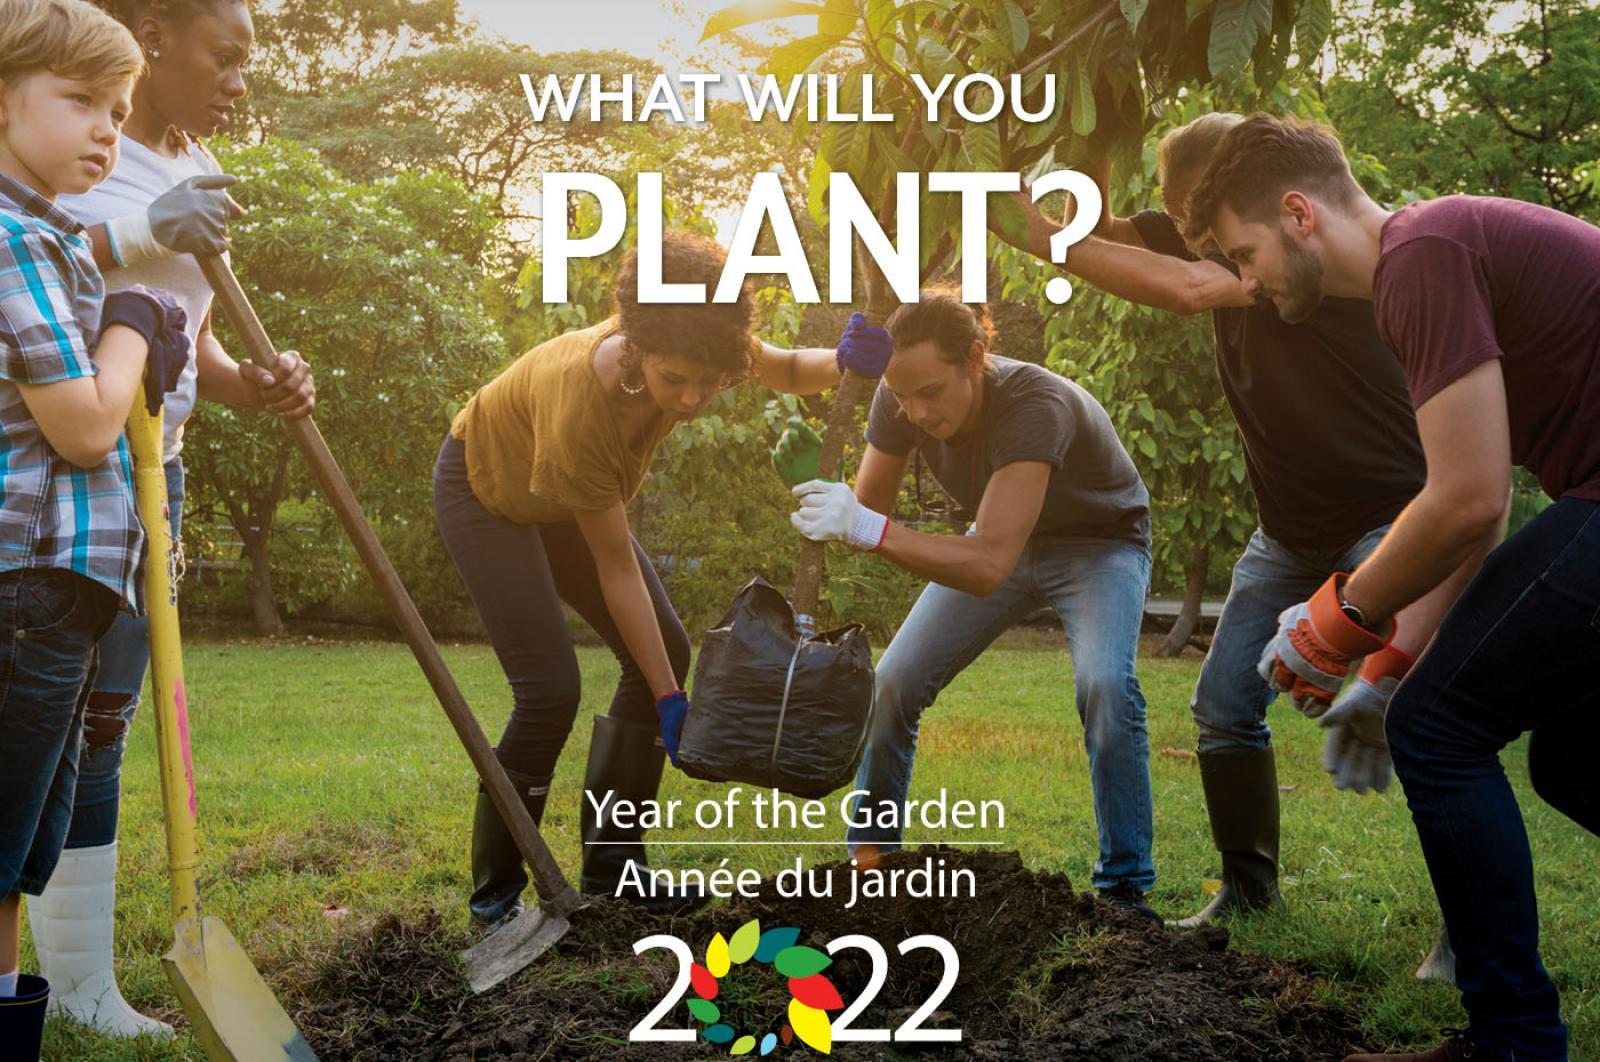 Year of the Garden 2022